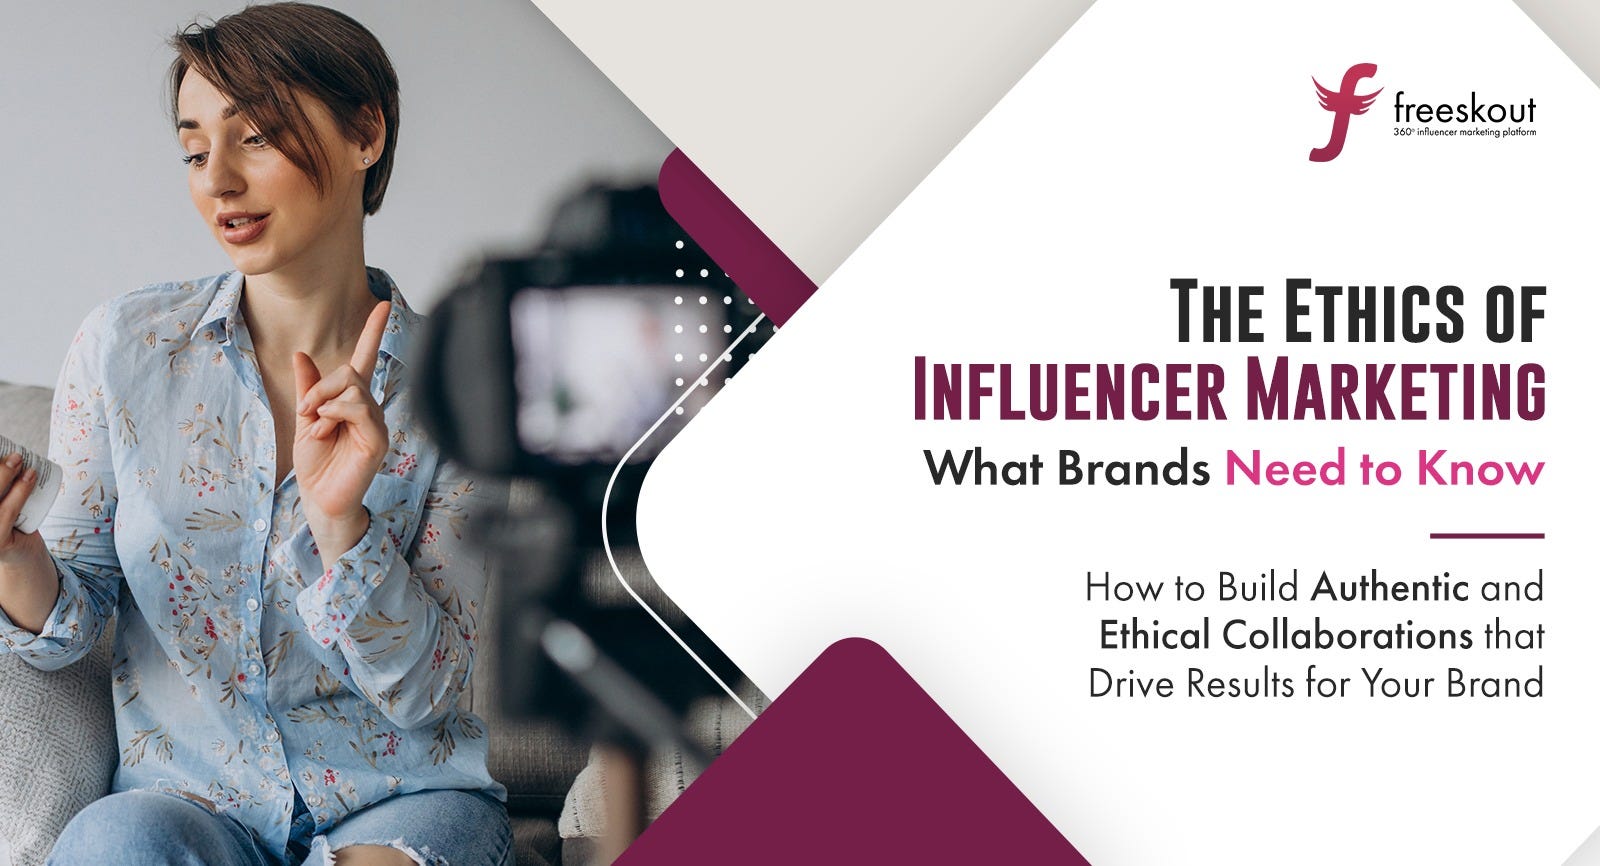 The Ethics of Influencer Marketing: What Brands Need to Know